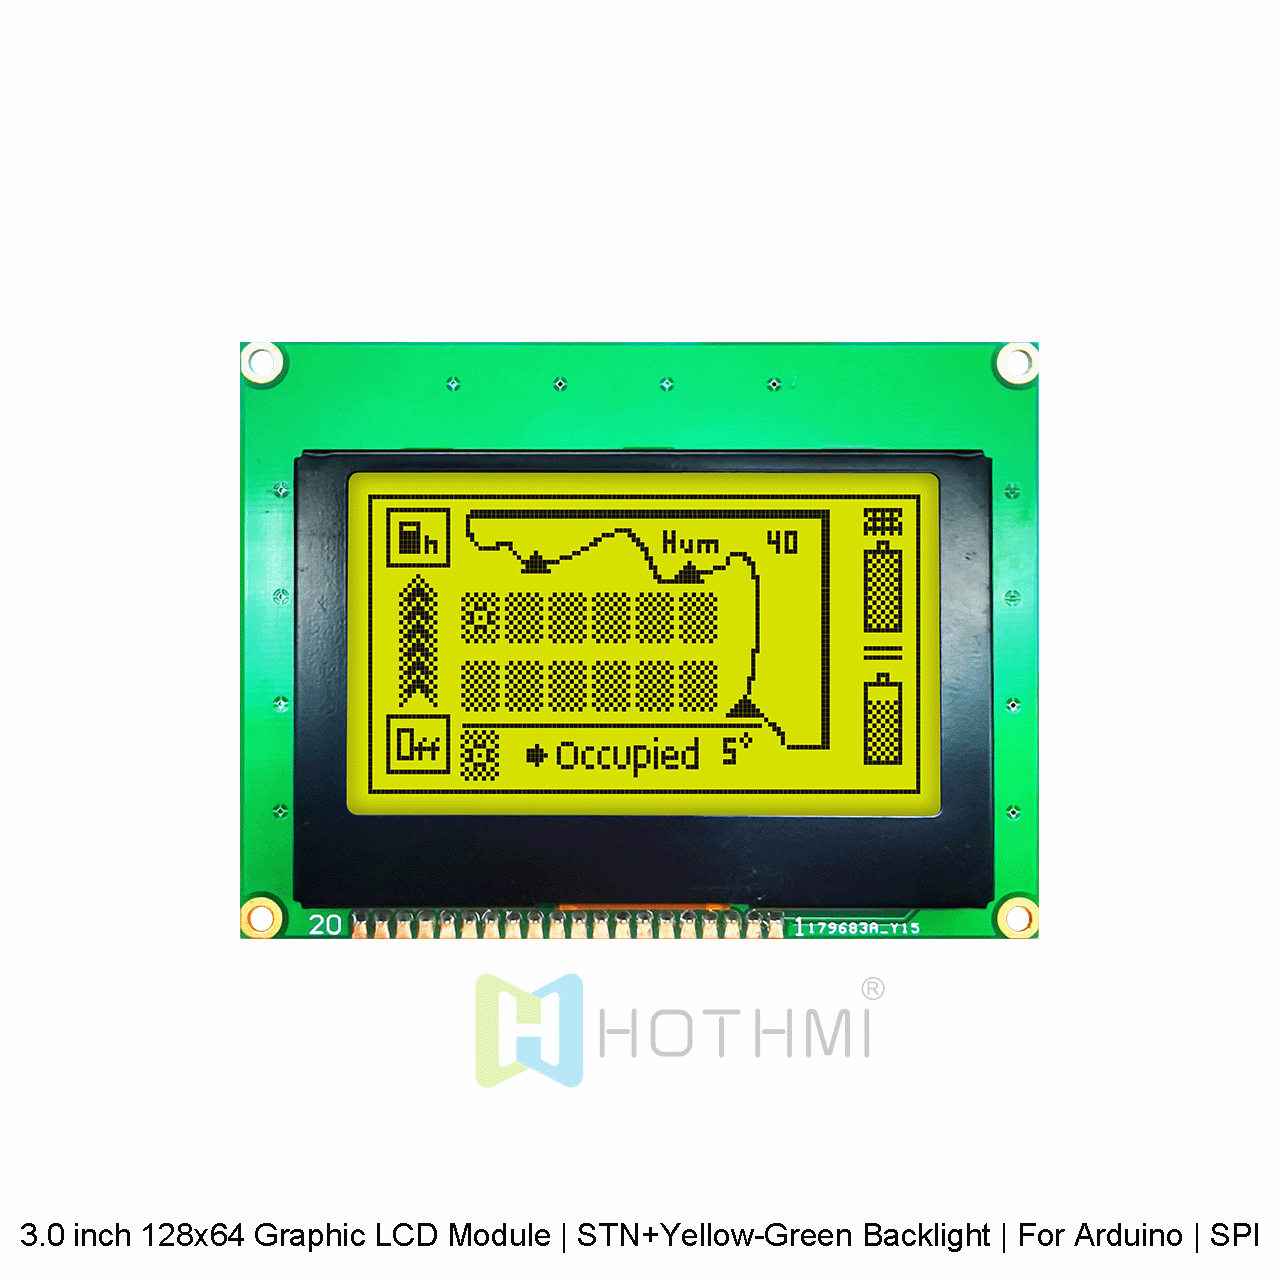 3.0 inch 128x64 Graphic LCD Module | STN+Yellow-Green Backlight | For Arduino | SPI Interface | 3.3V